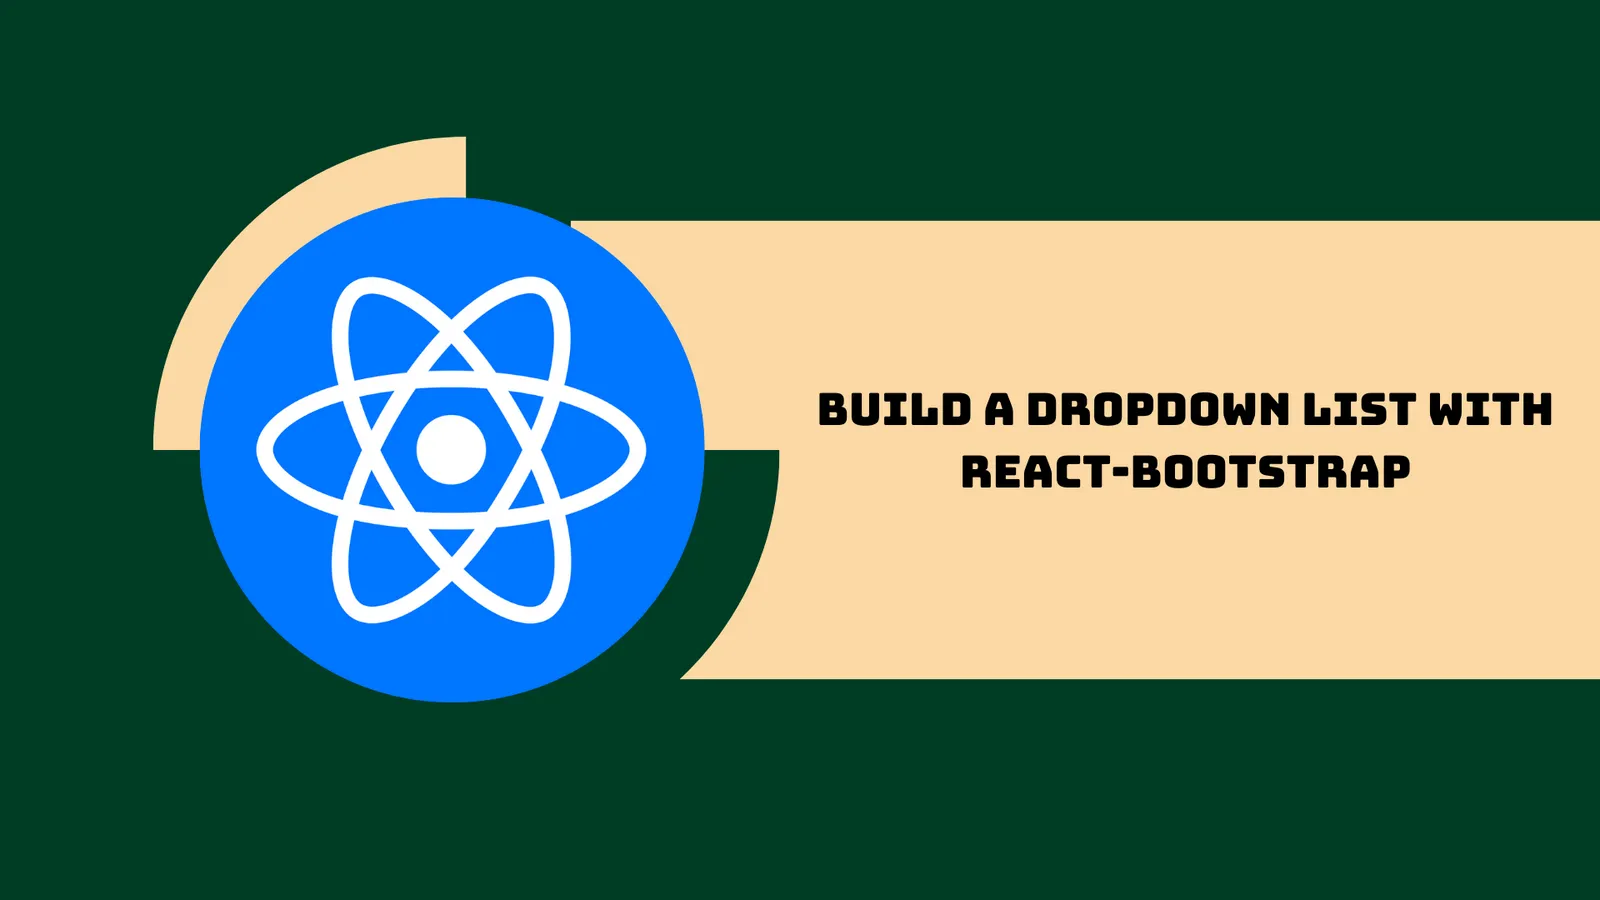 Build a Dropdown List with React-Bootstrap